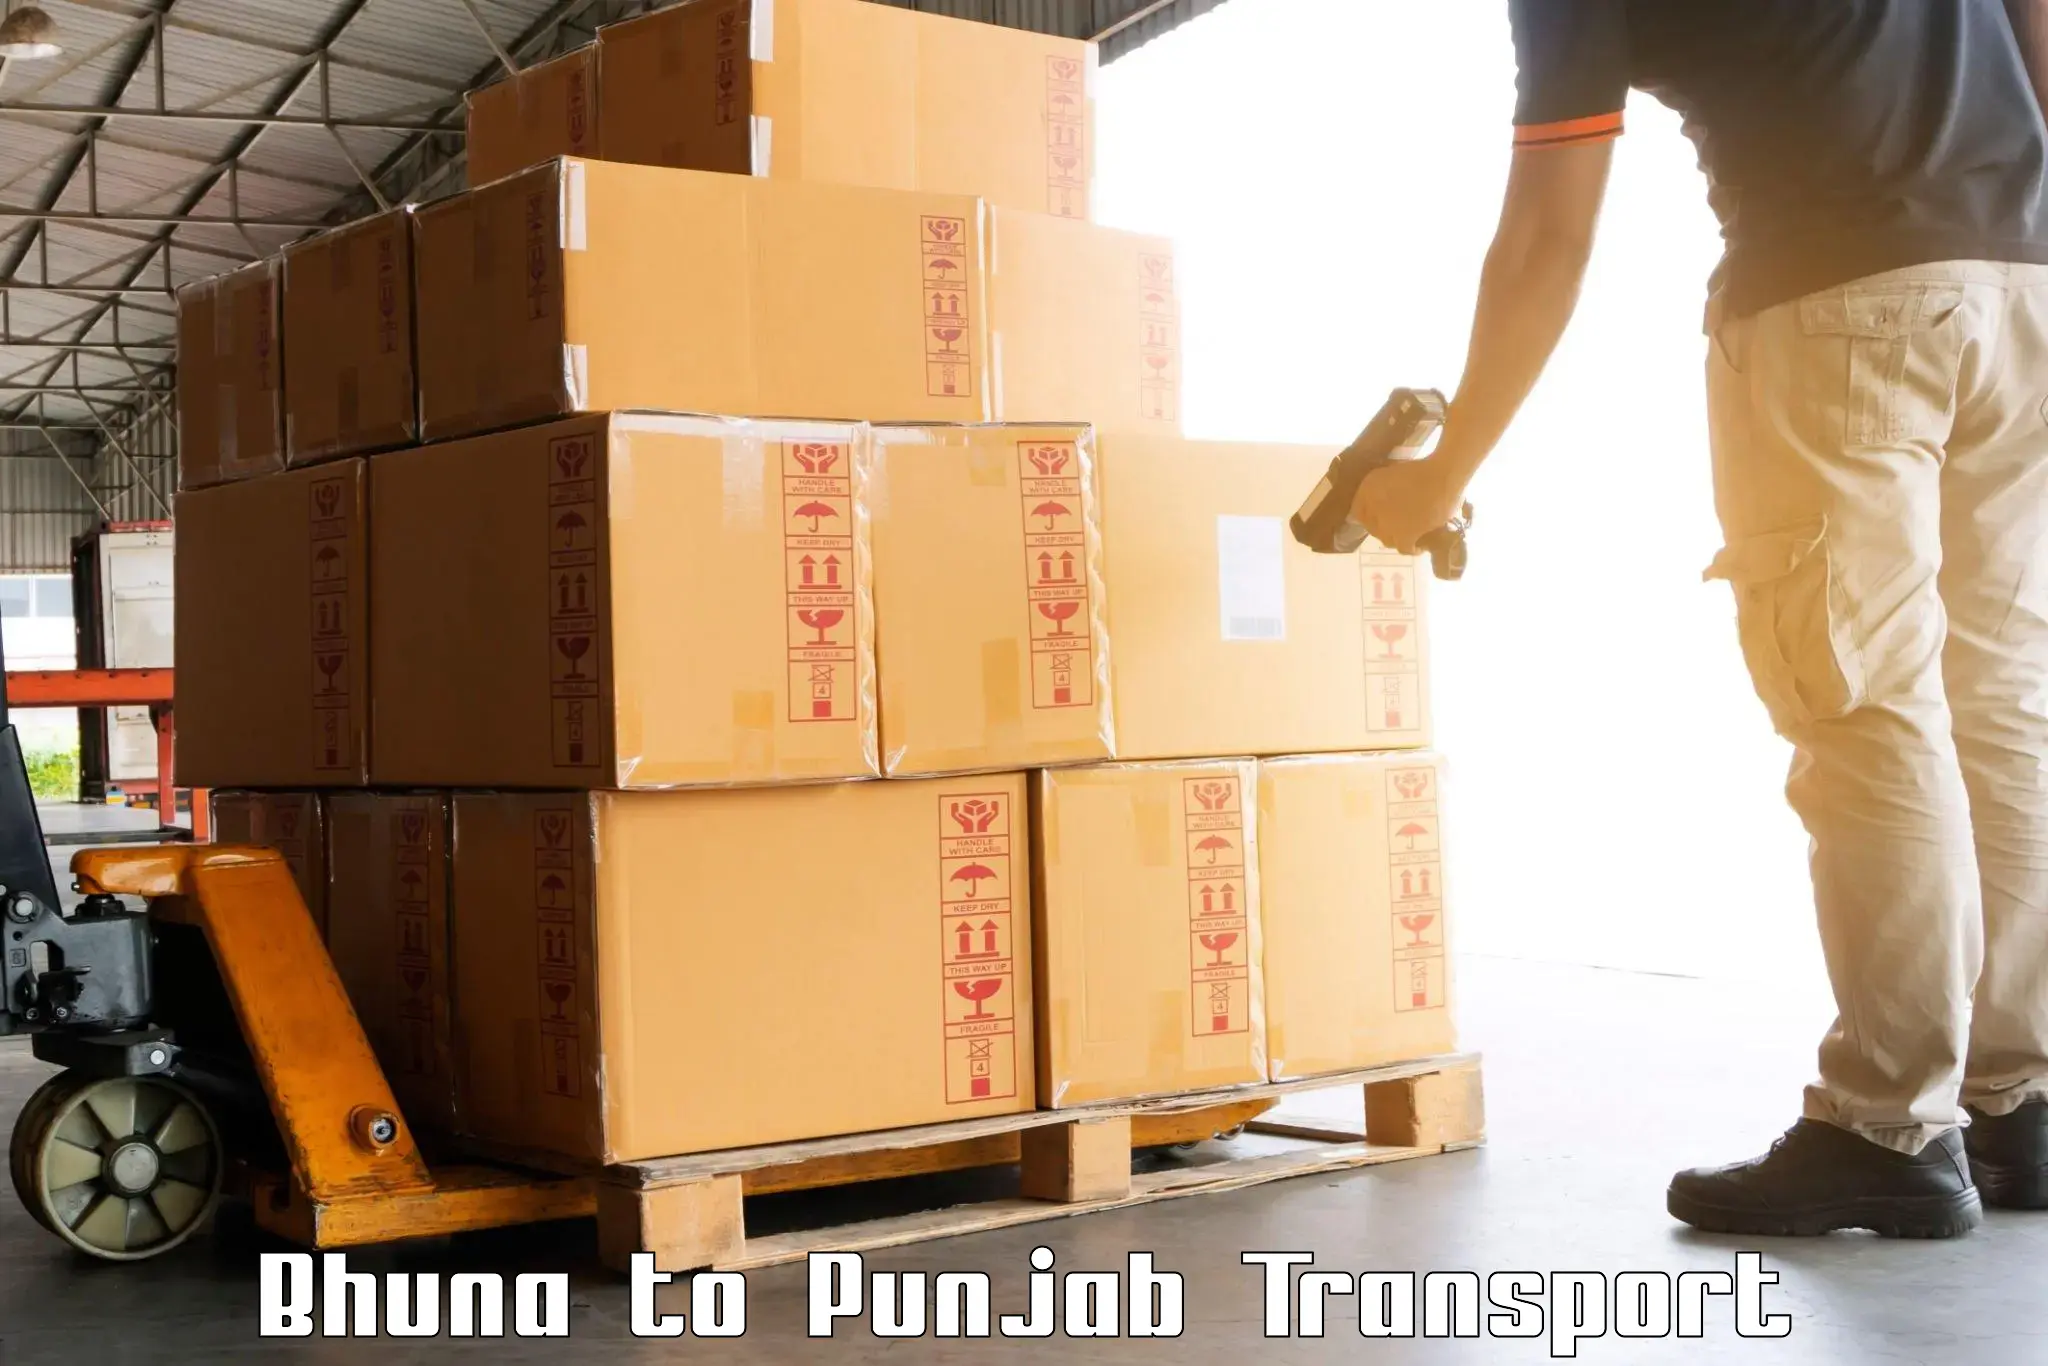 Container transport service Bhuna to Amritsar